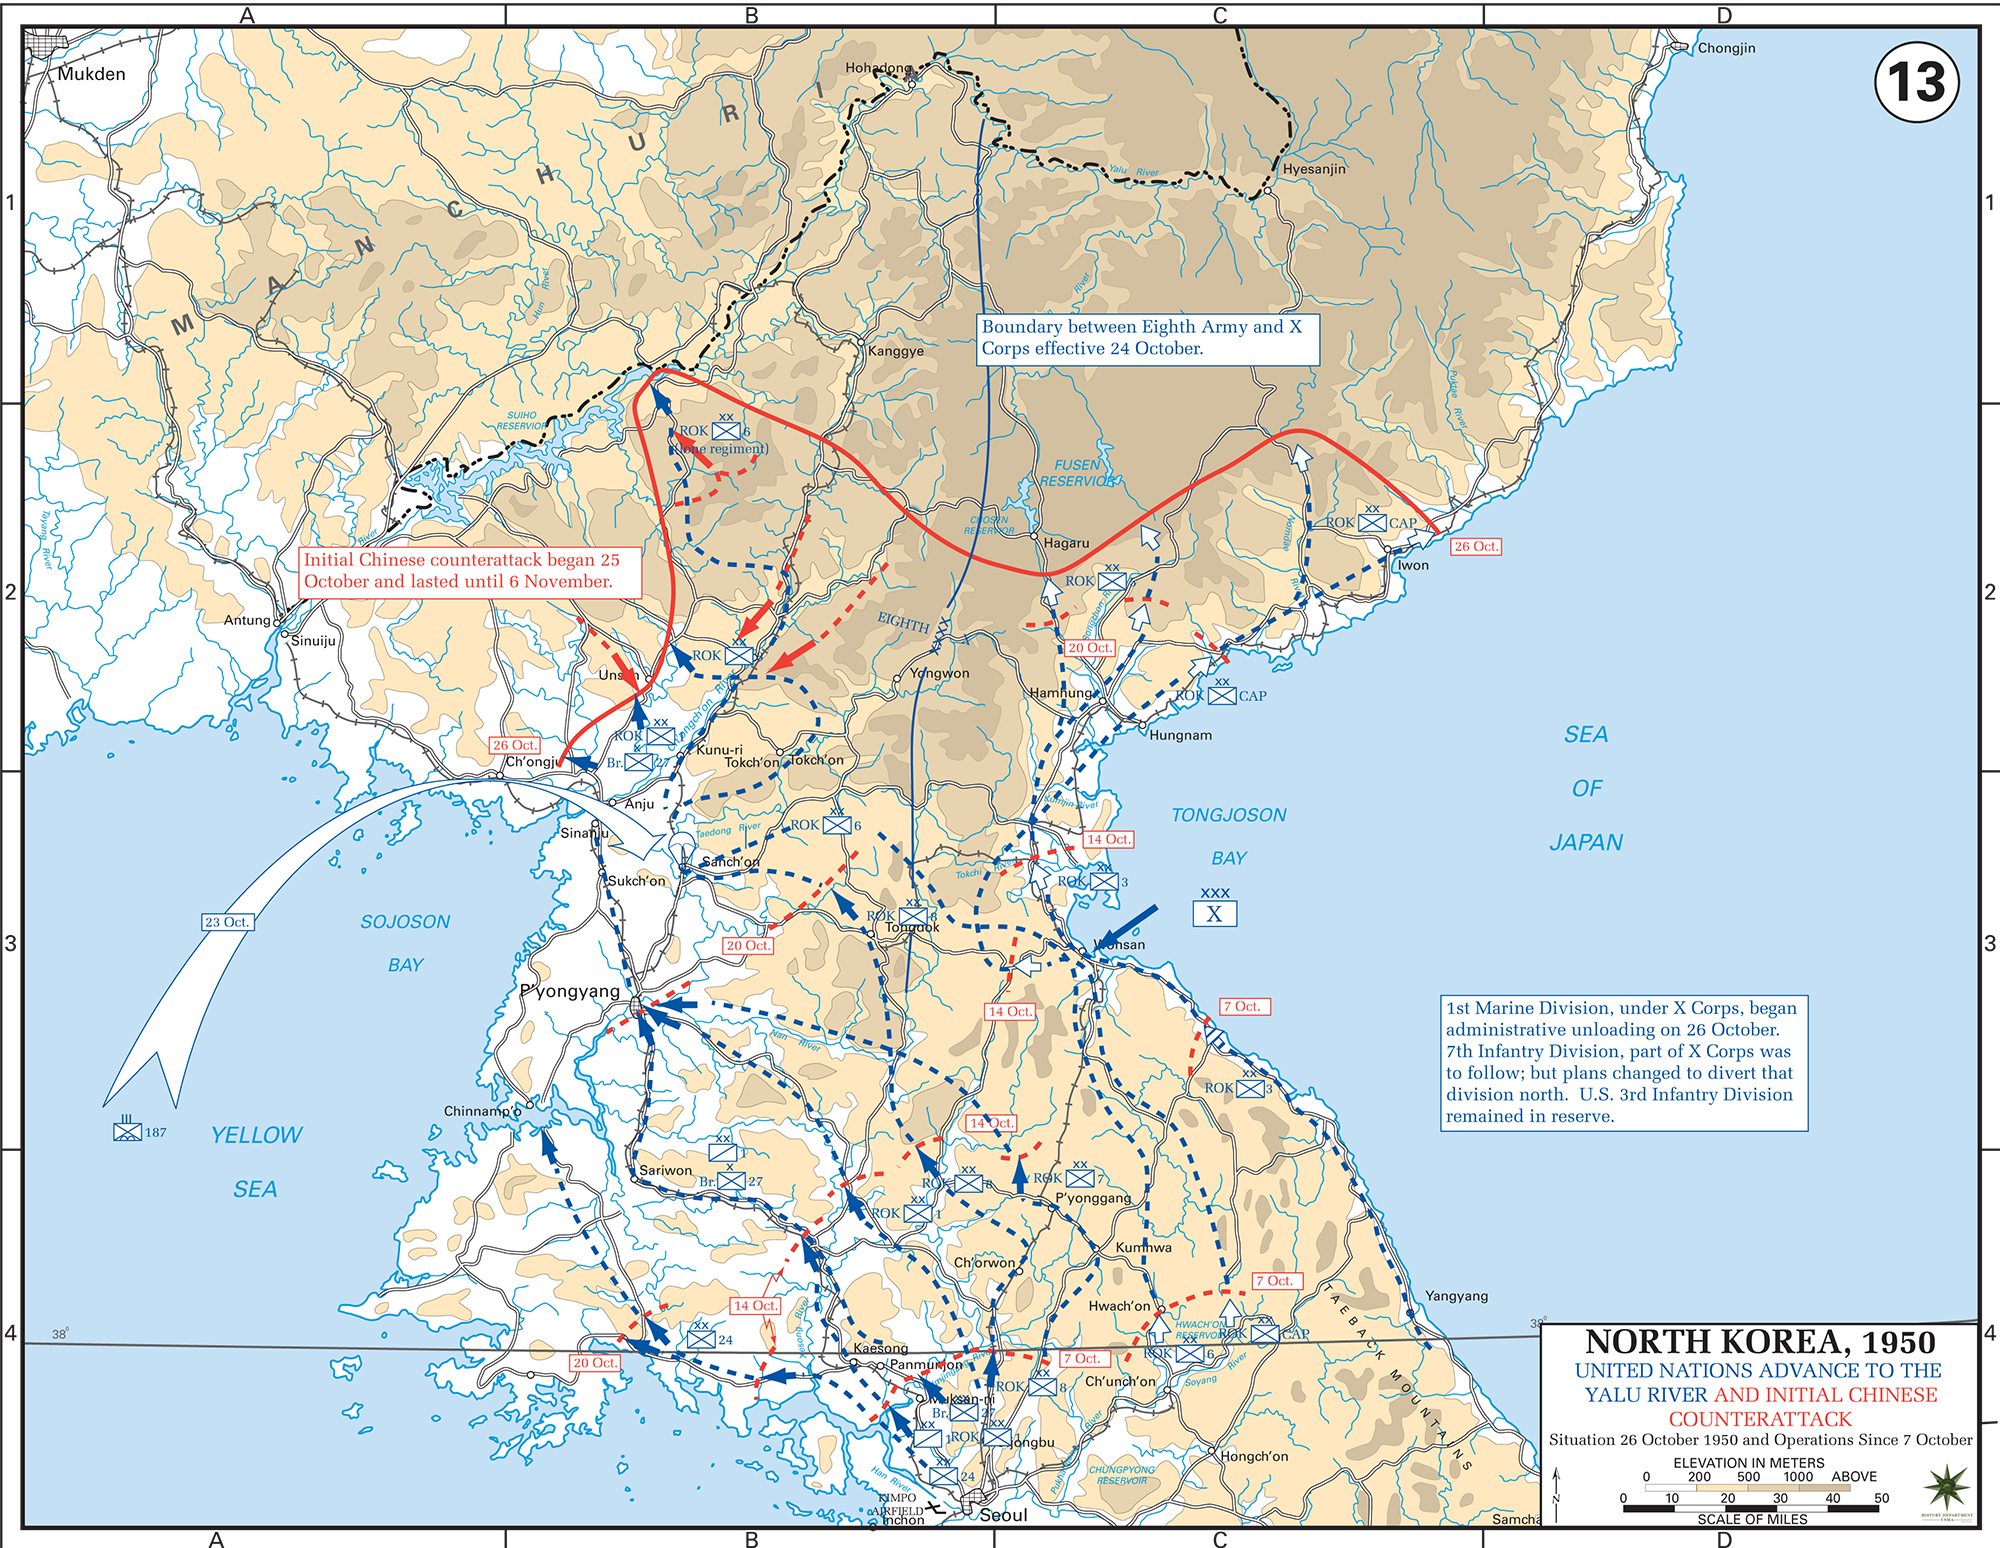 Map of the Korean War: North Korea. U.N. Advance to the Yalu River, Initial Chinese Counter-Attack, Situation October 26, 1950, Operations Since October 7, 1950.